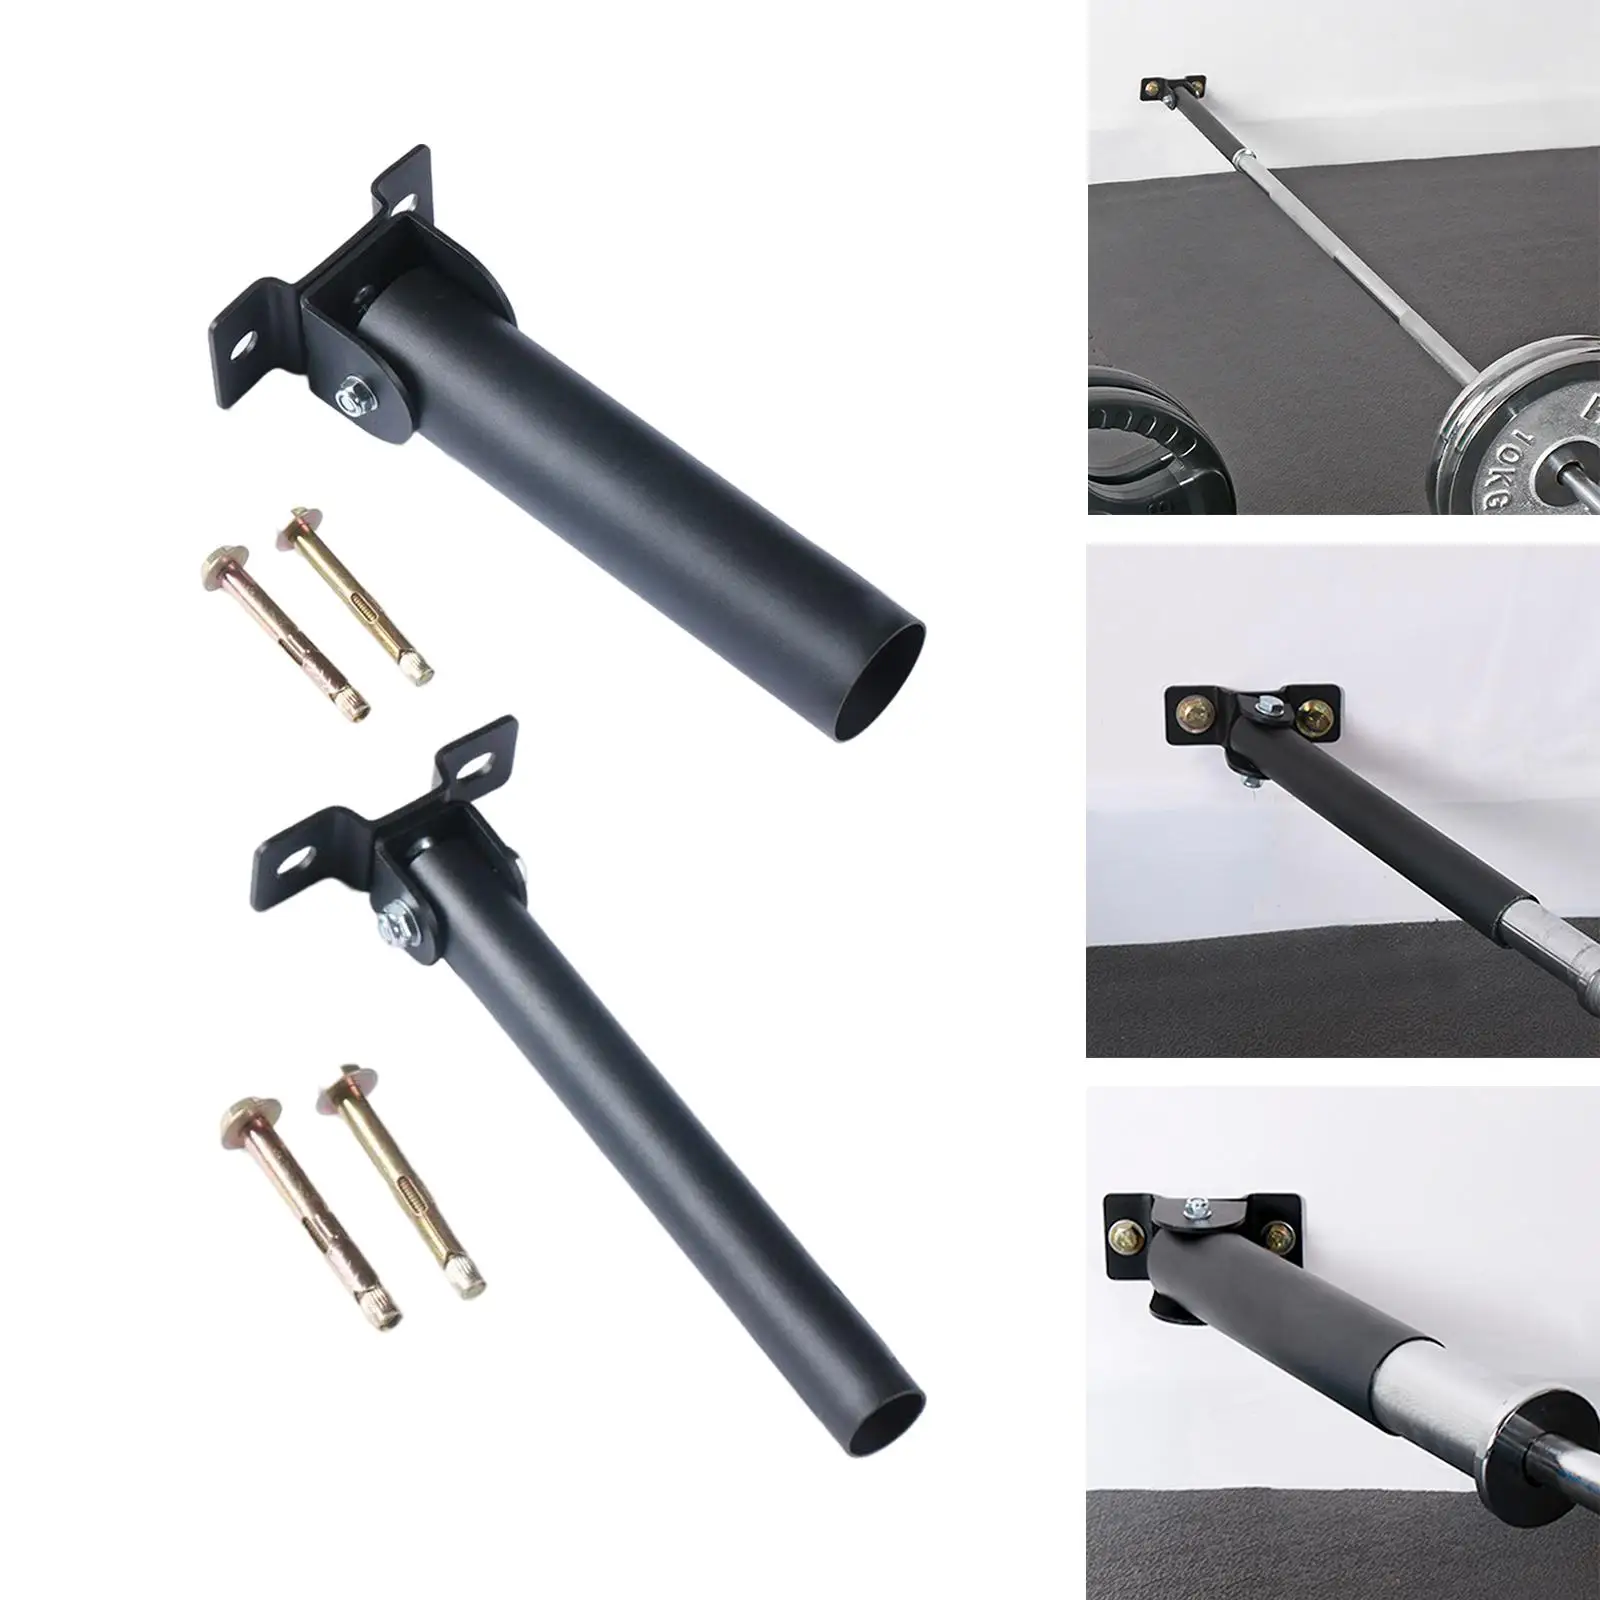 t shape bar Row Platform Barbell Fixed Attachment t shape bar Row Plate for Gym Home Exercises